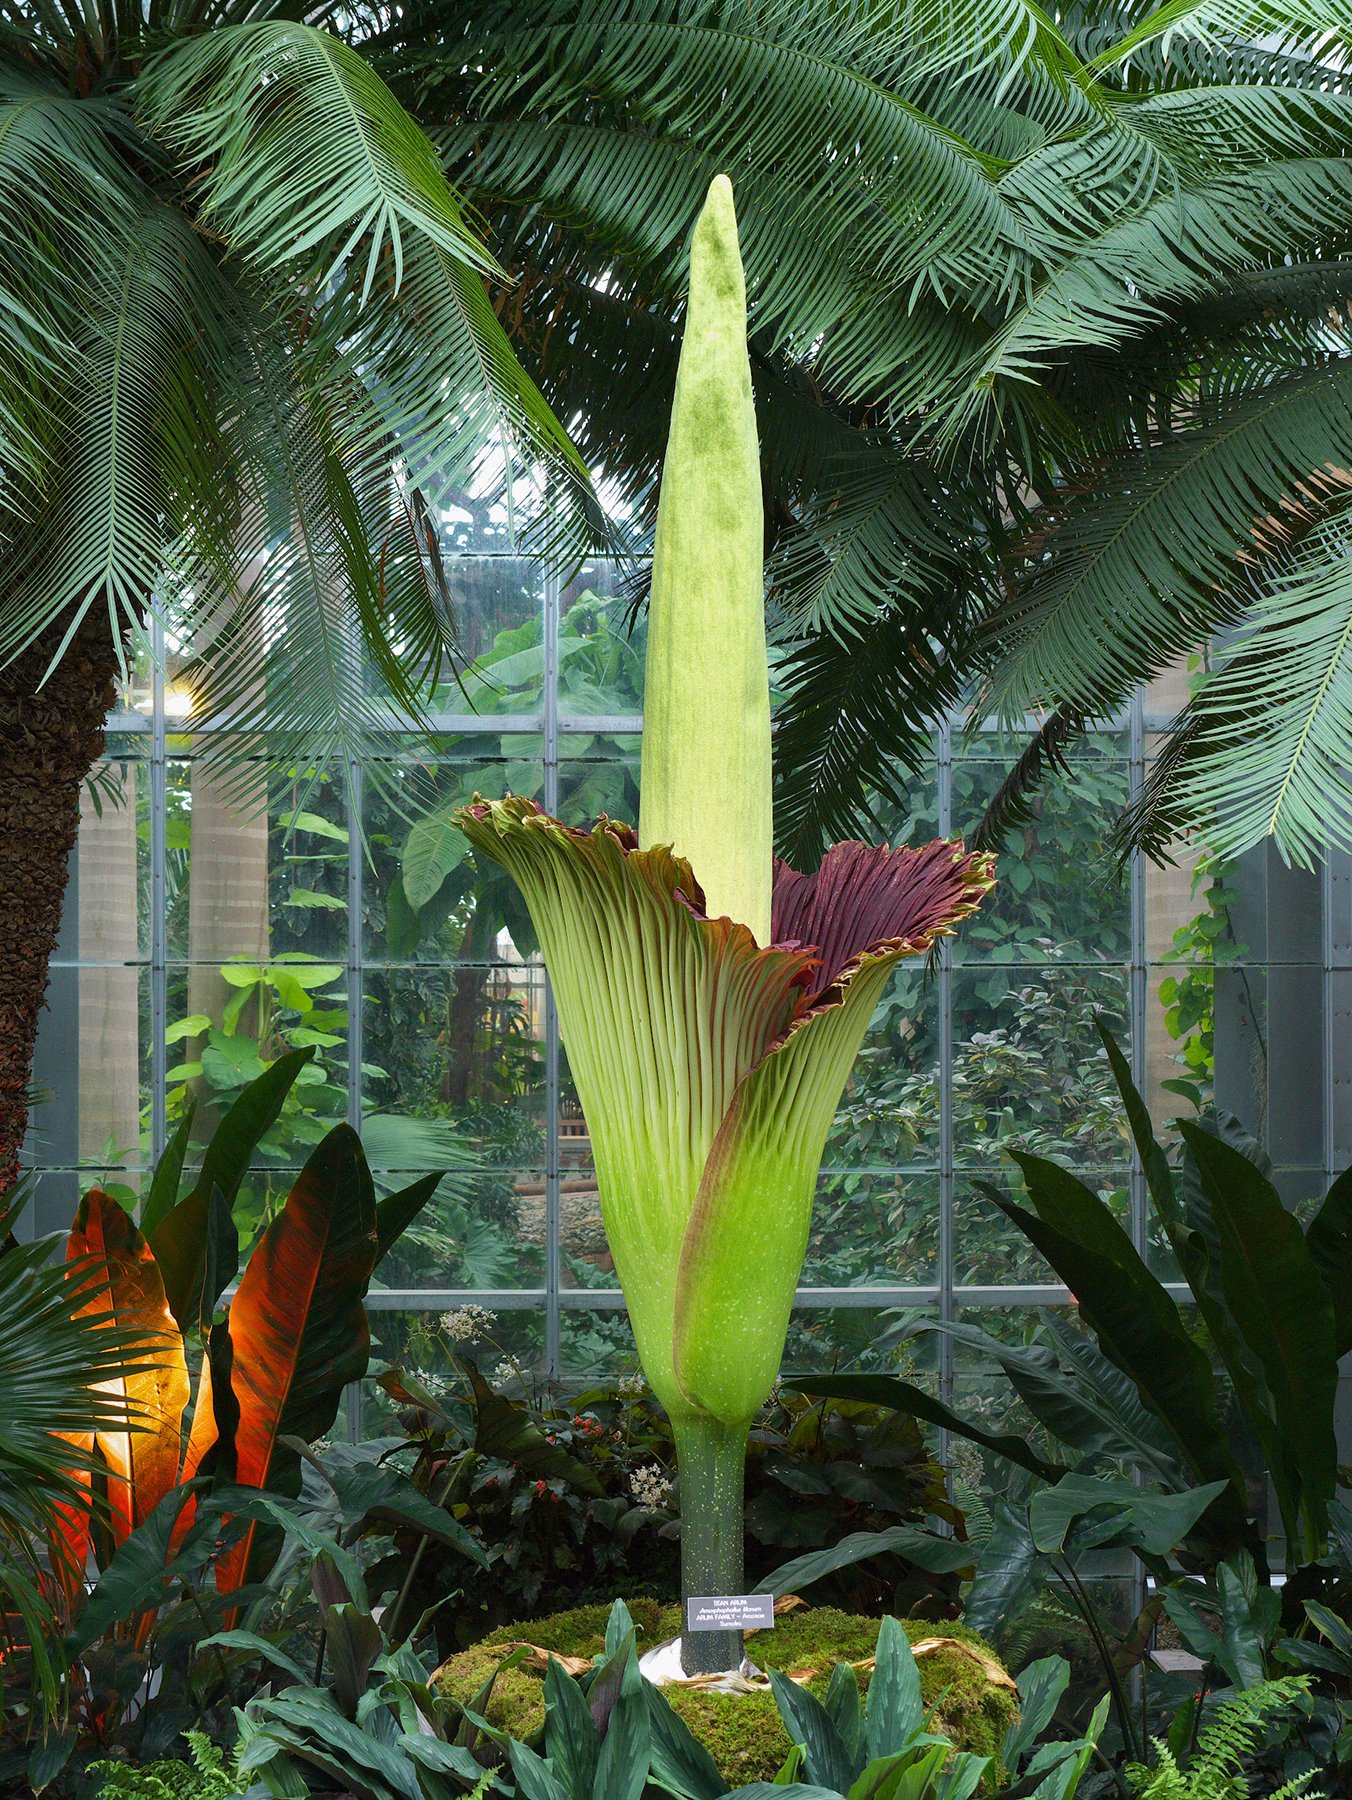 The 2013 titan arum in full bloom. Photograph courtesy of the US Botanical Garden.